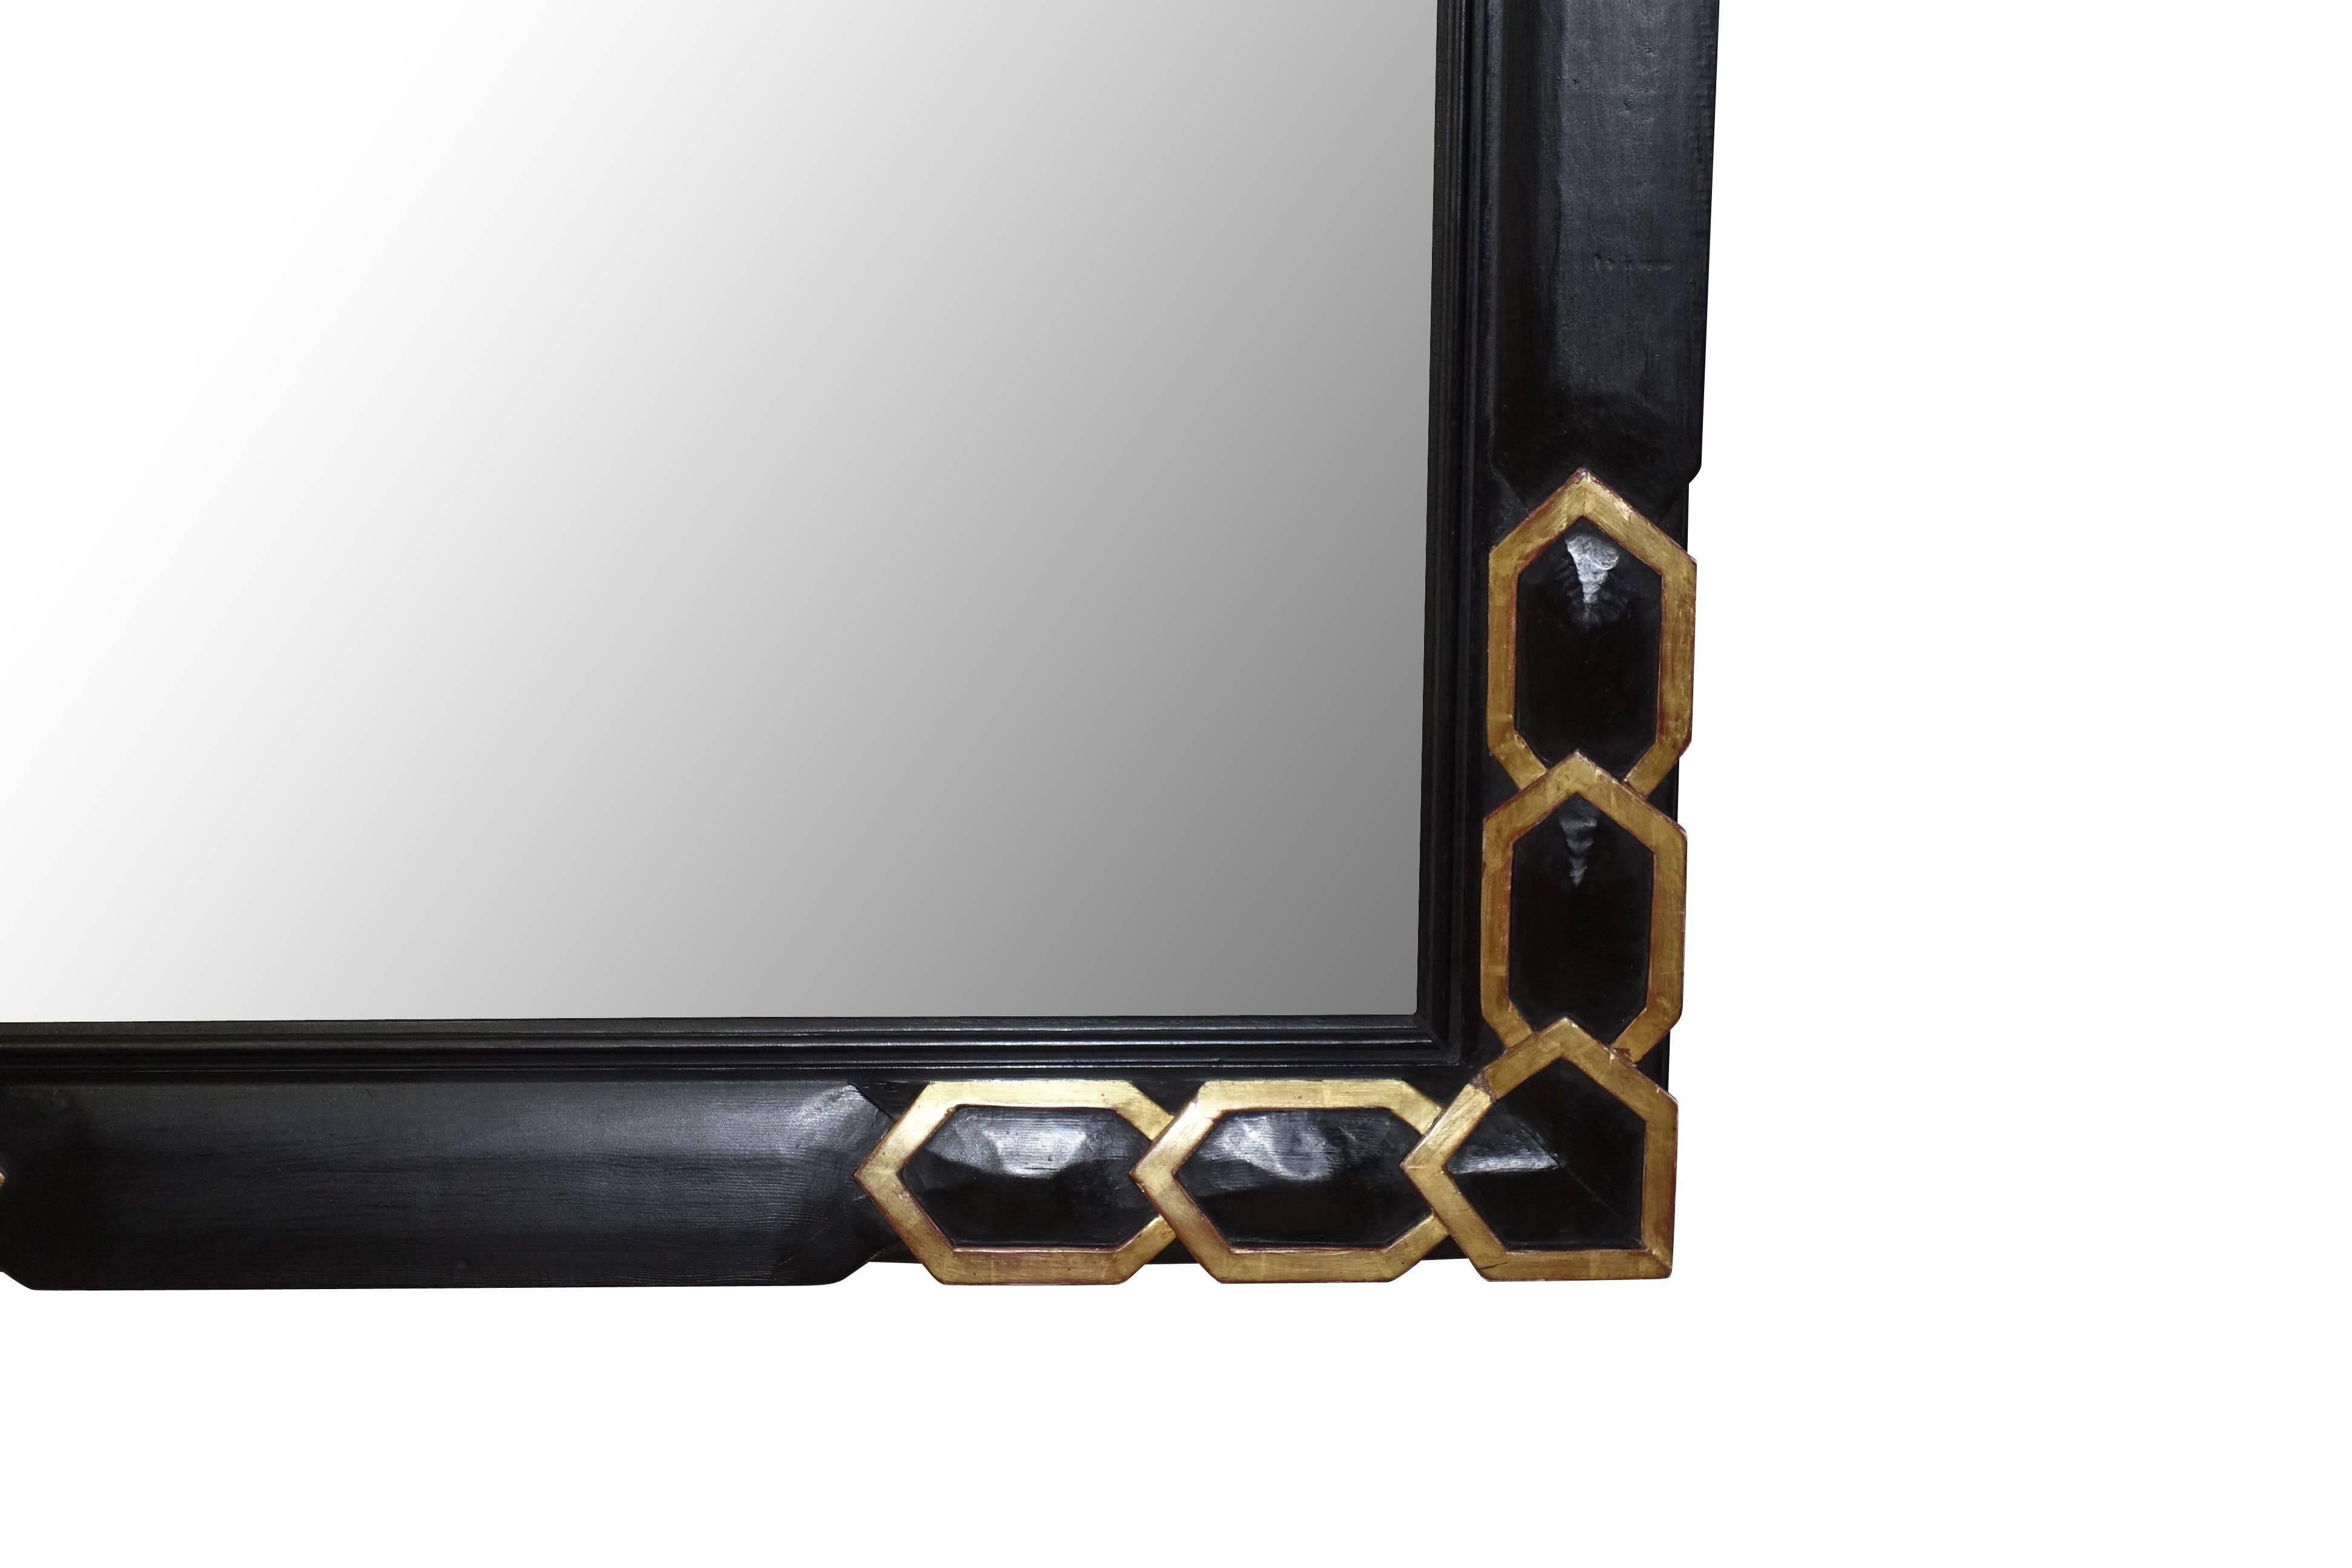 1930s French interlocking gold gilt rings at the corner of extra large ebonized frame mirror.
New mirror.
